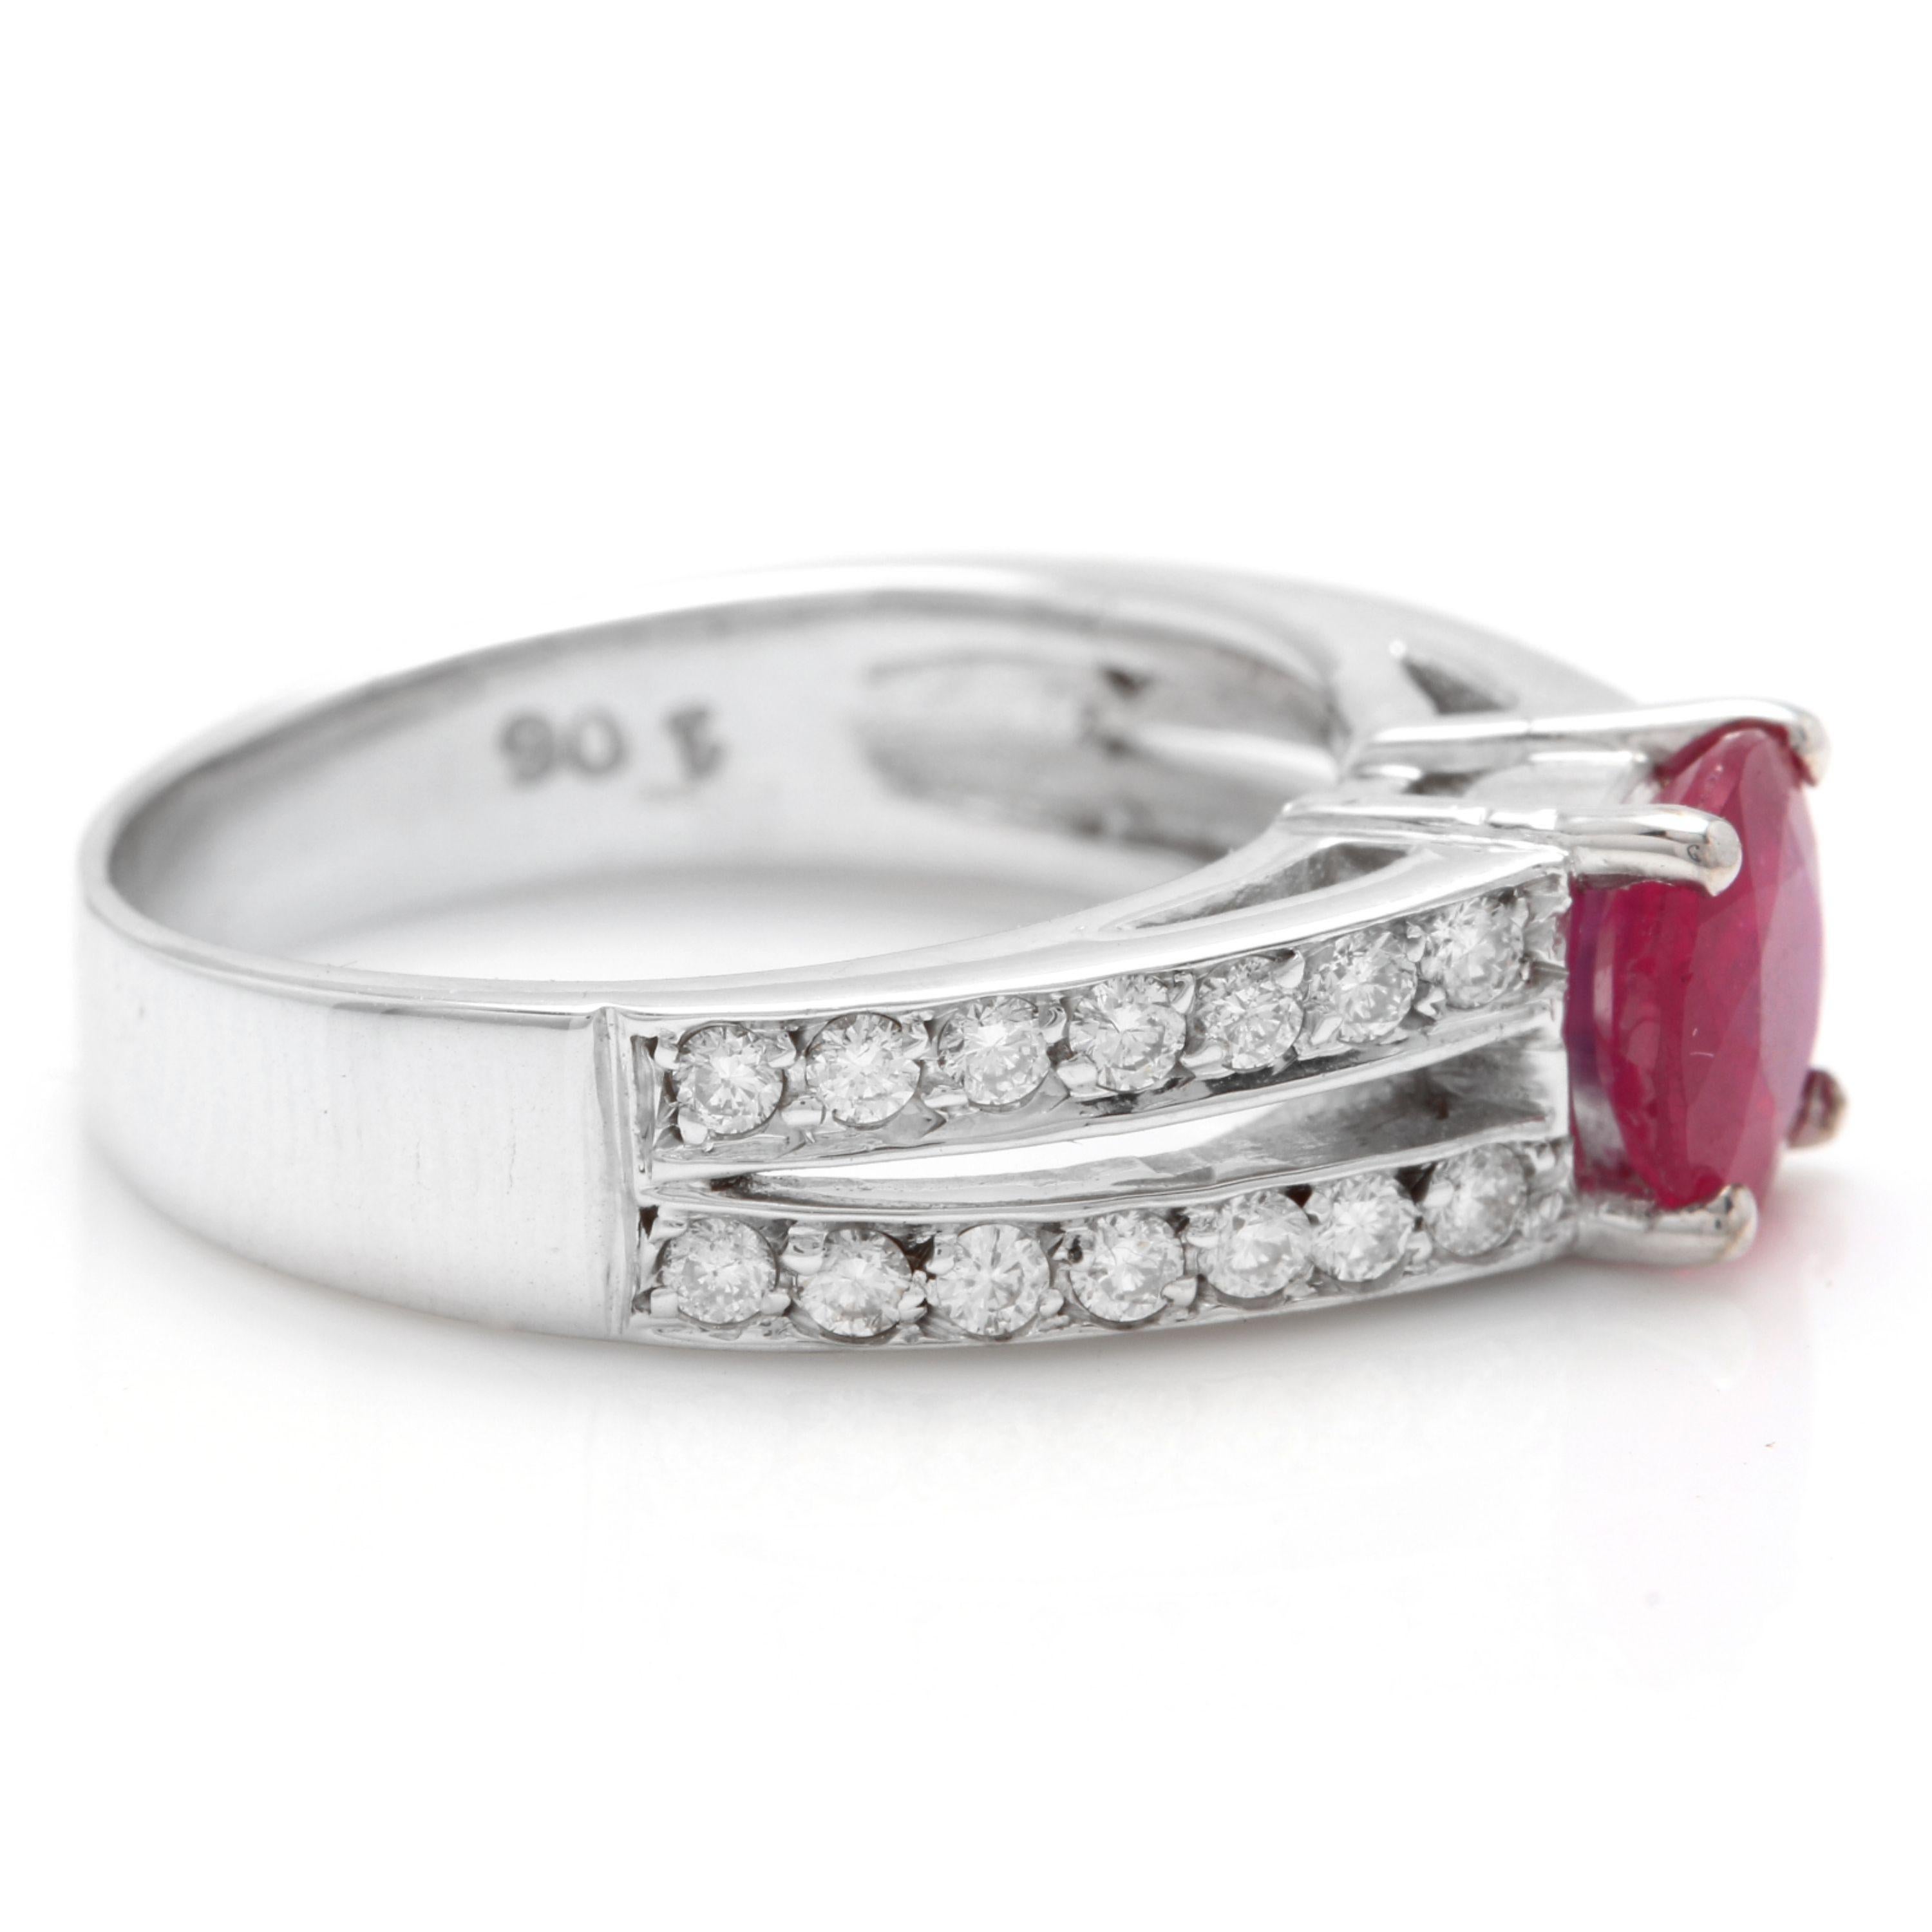 Mixed Cut 1.60 Carat Impressive Red Ruby and Natural Diamond 14 Karat White Gold Ring For Sale